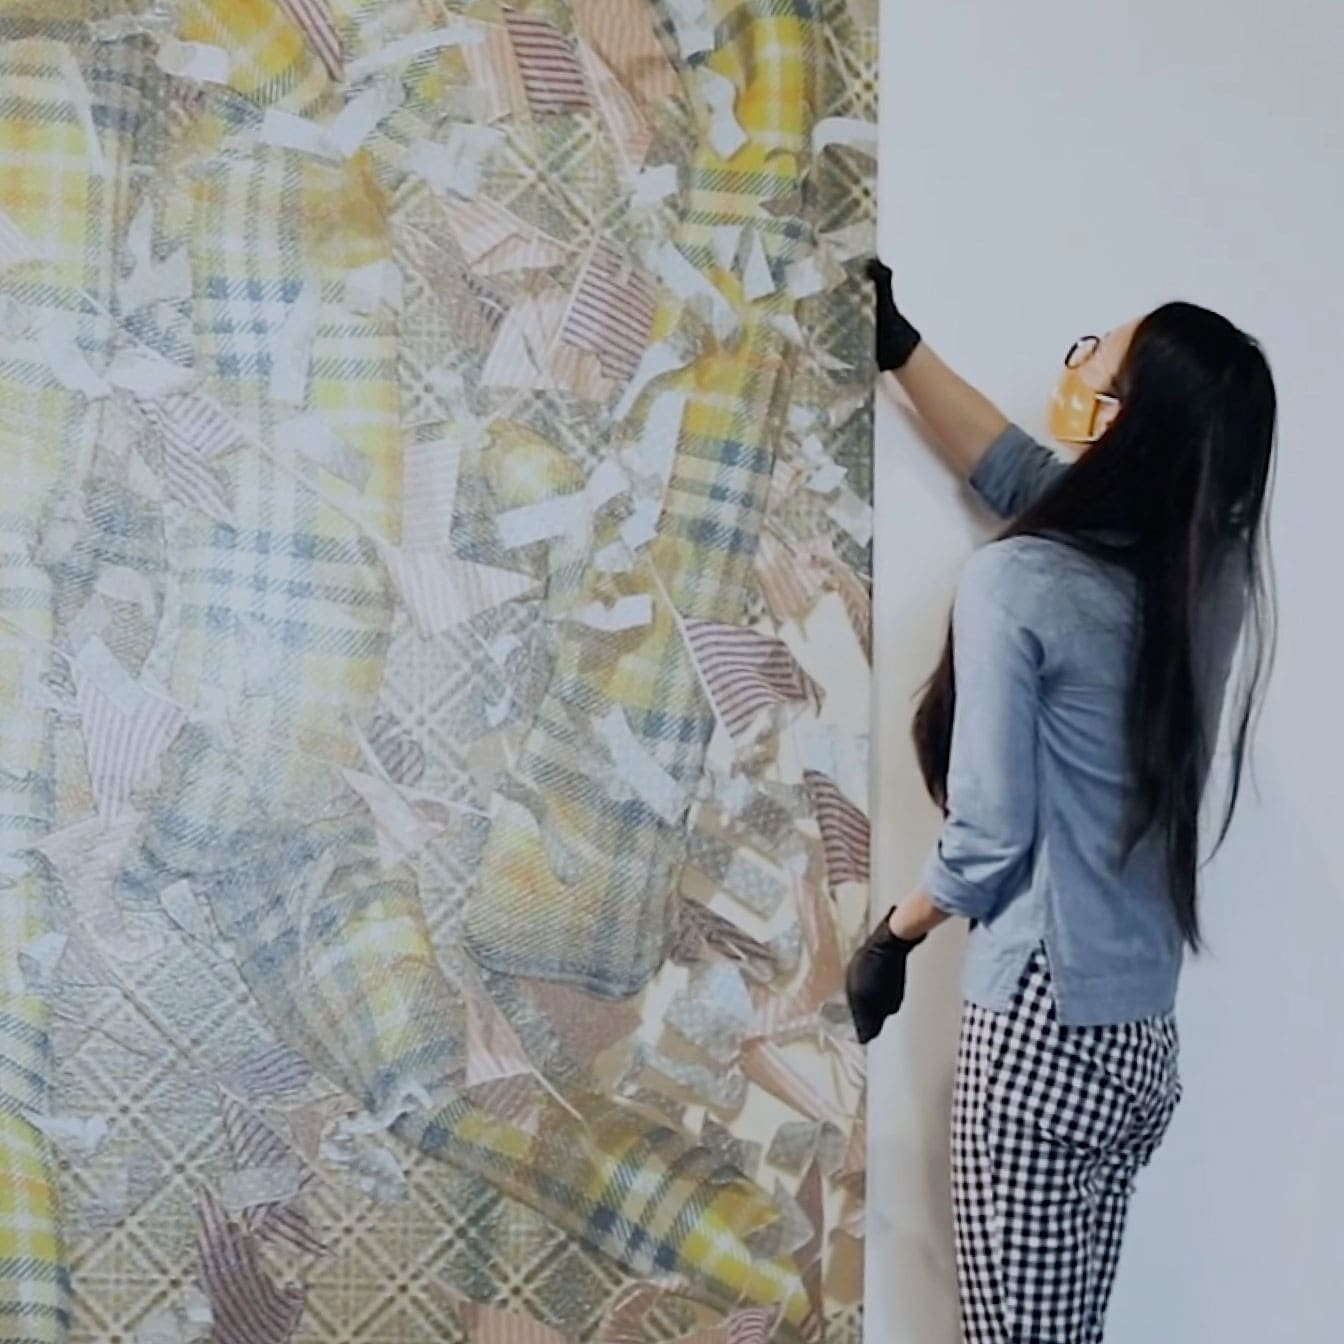 An artist installs her giant art piece on the wall. The piece is an abstract collage of neutral colored plaid patterns.